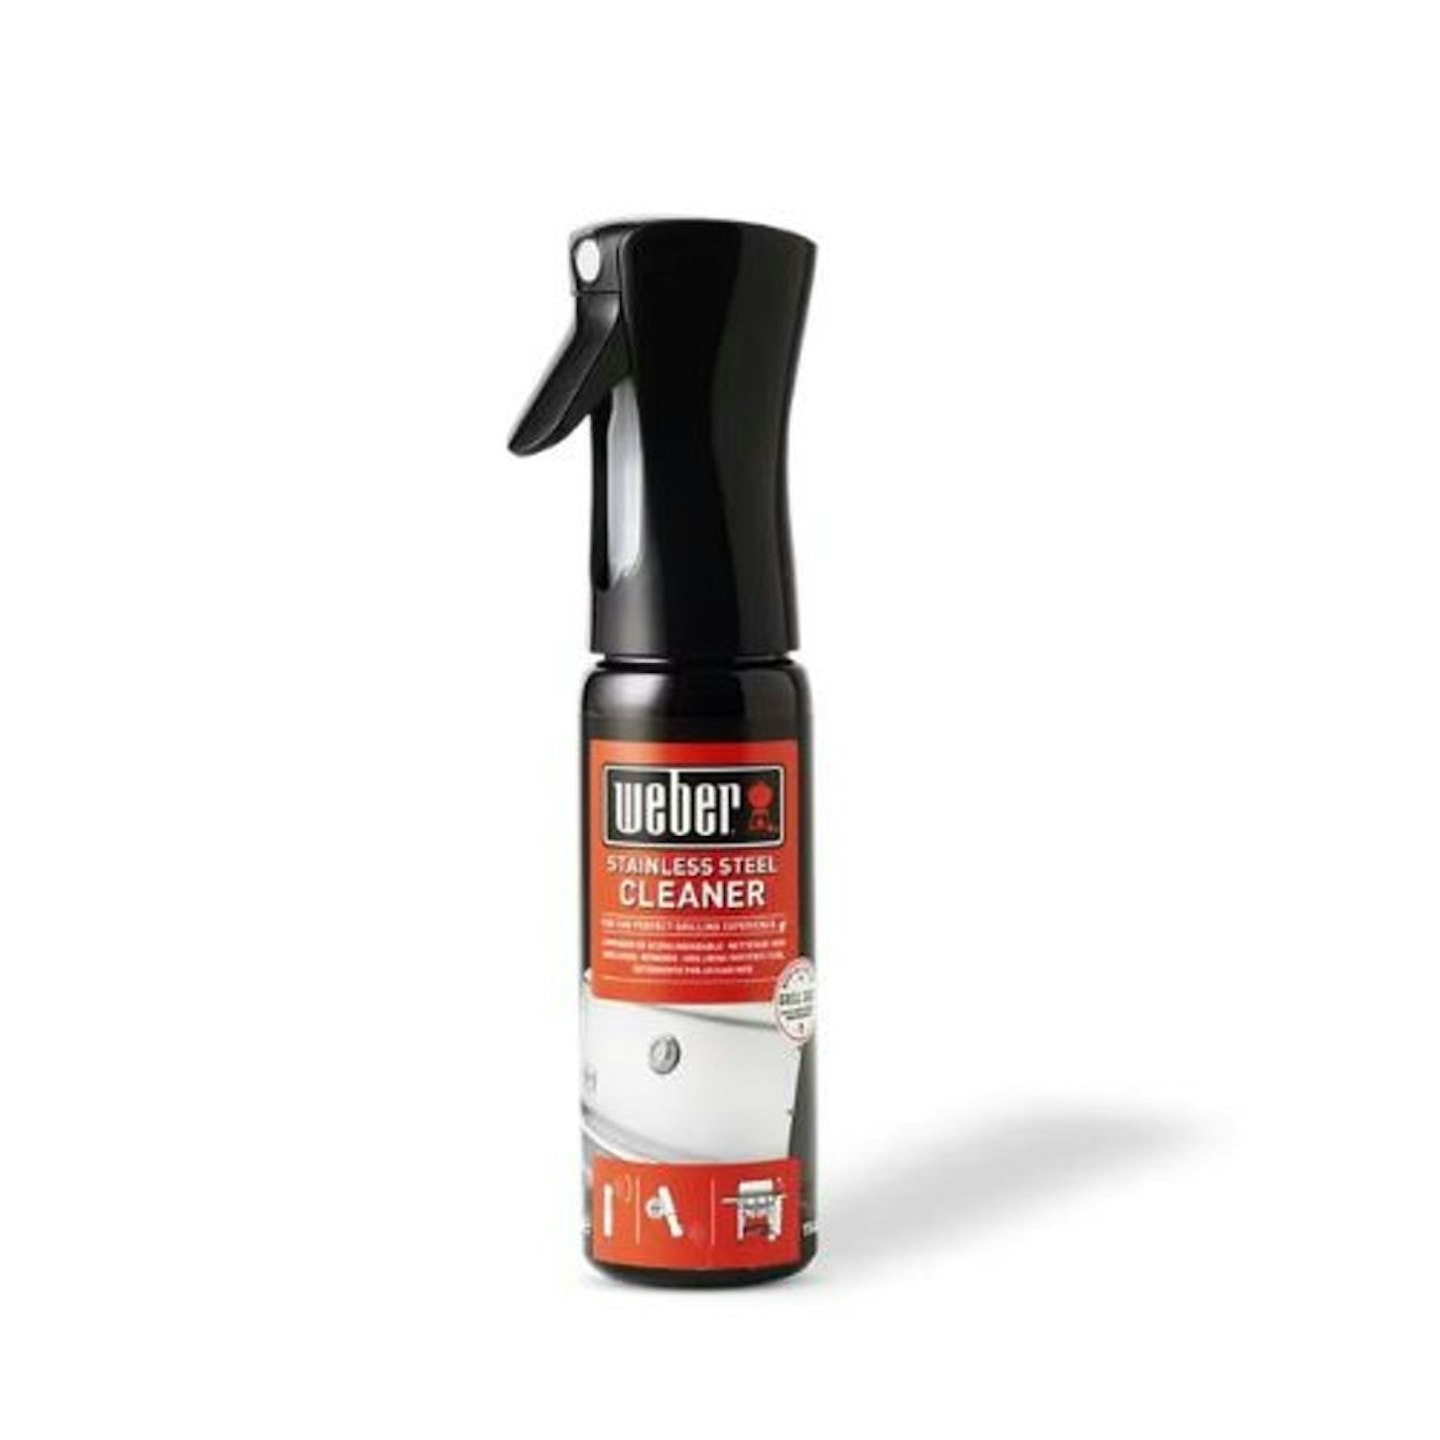 bbq-cleaner-stainless-steel-weber